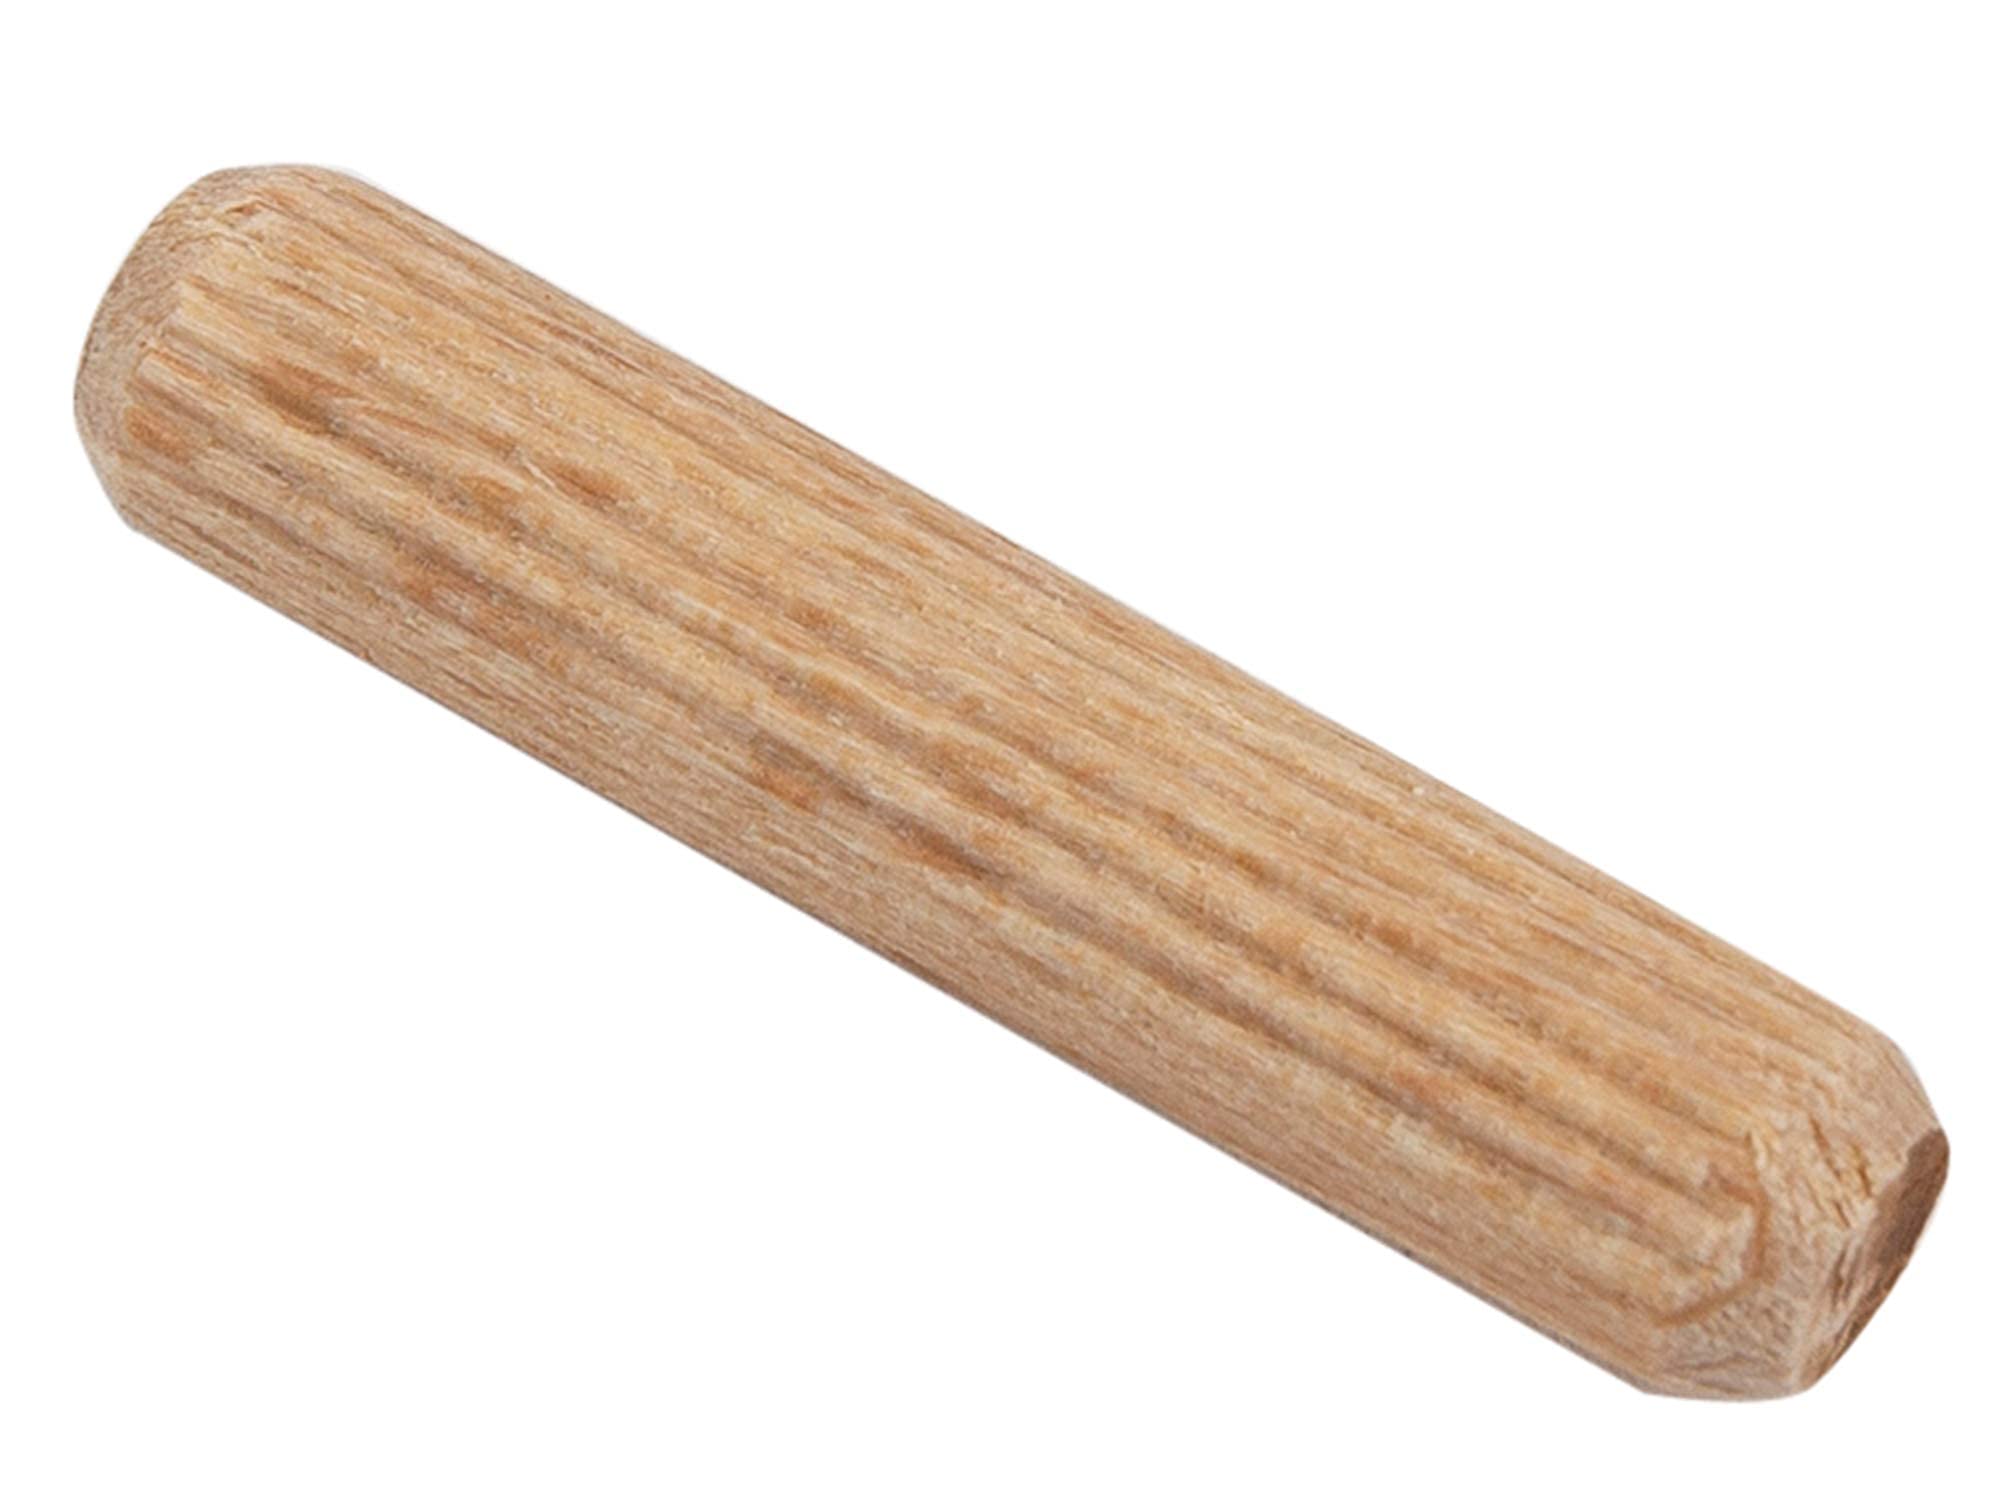 BICB Fluted Wood Kiln Dowel Pins, 1/4" x 1-1/4"- 100 Pieces , Made of Beechwood